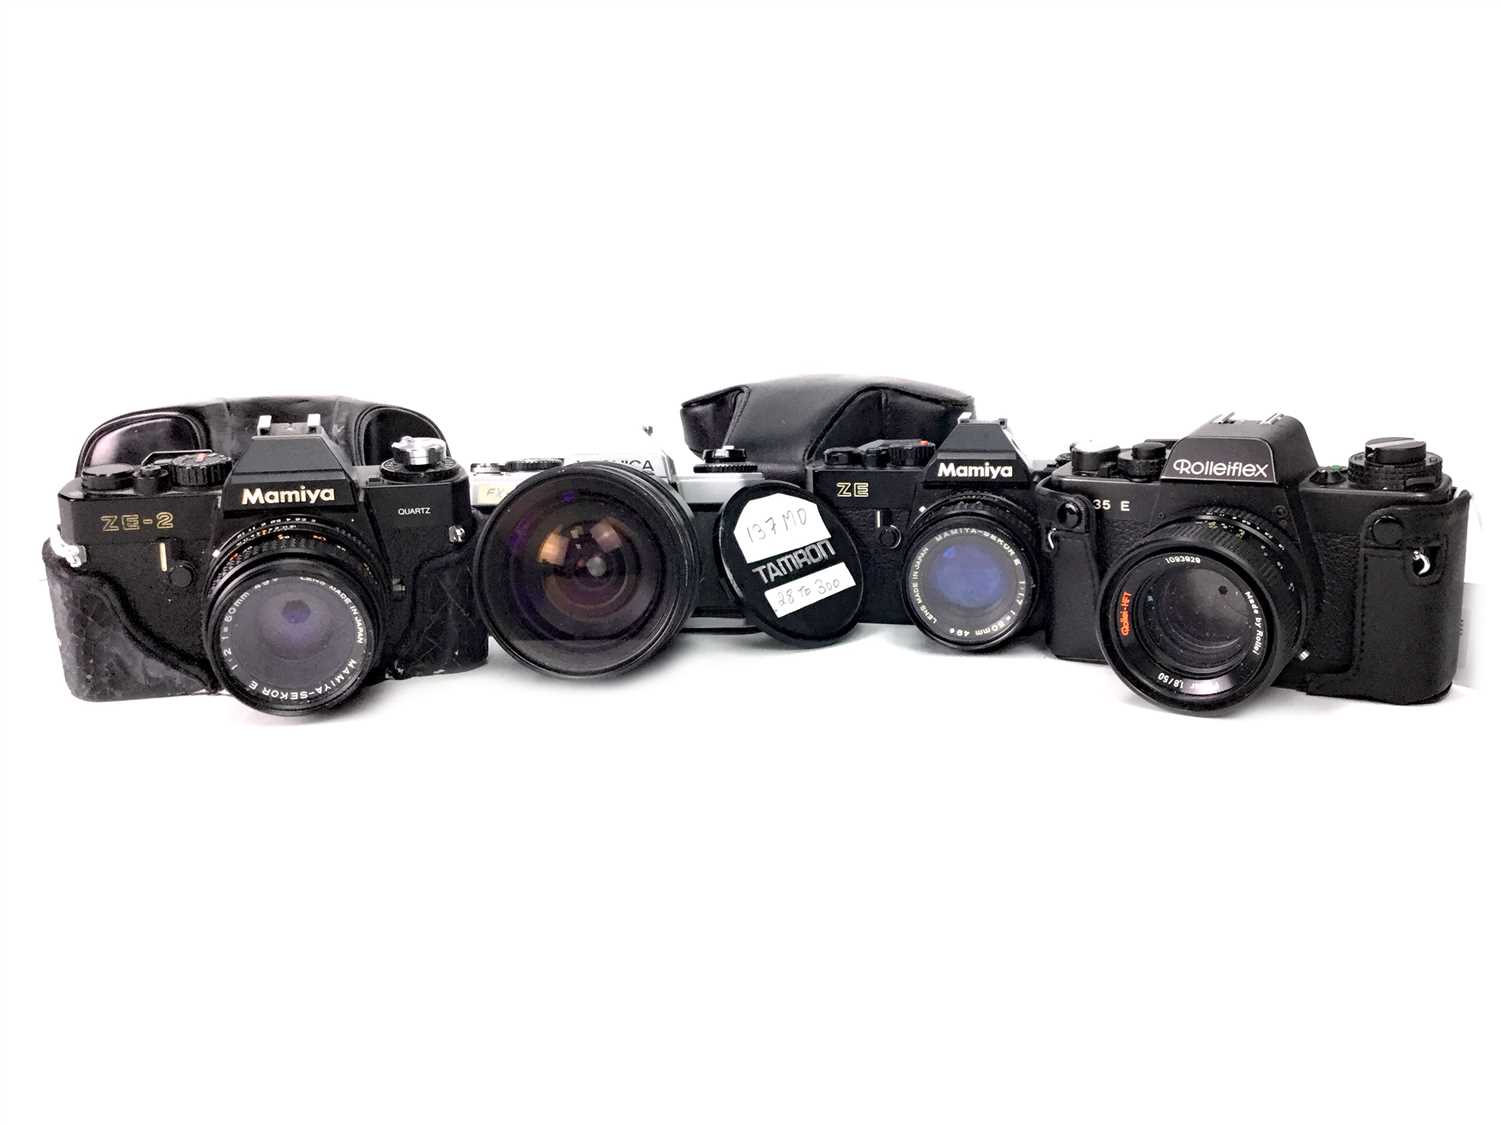 Lot 1479 - A ROLLIEFLEX SL 35 E SLR CAMERA AND OTHER CAMERAS